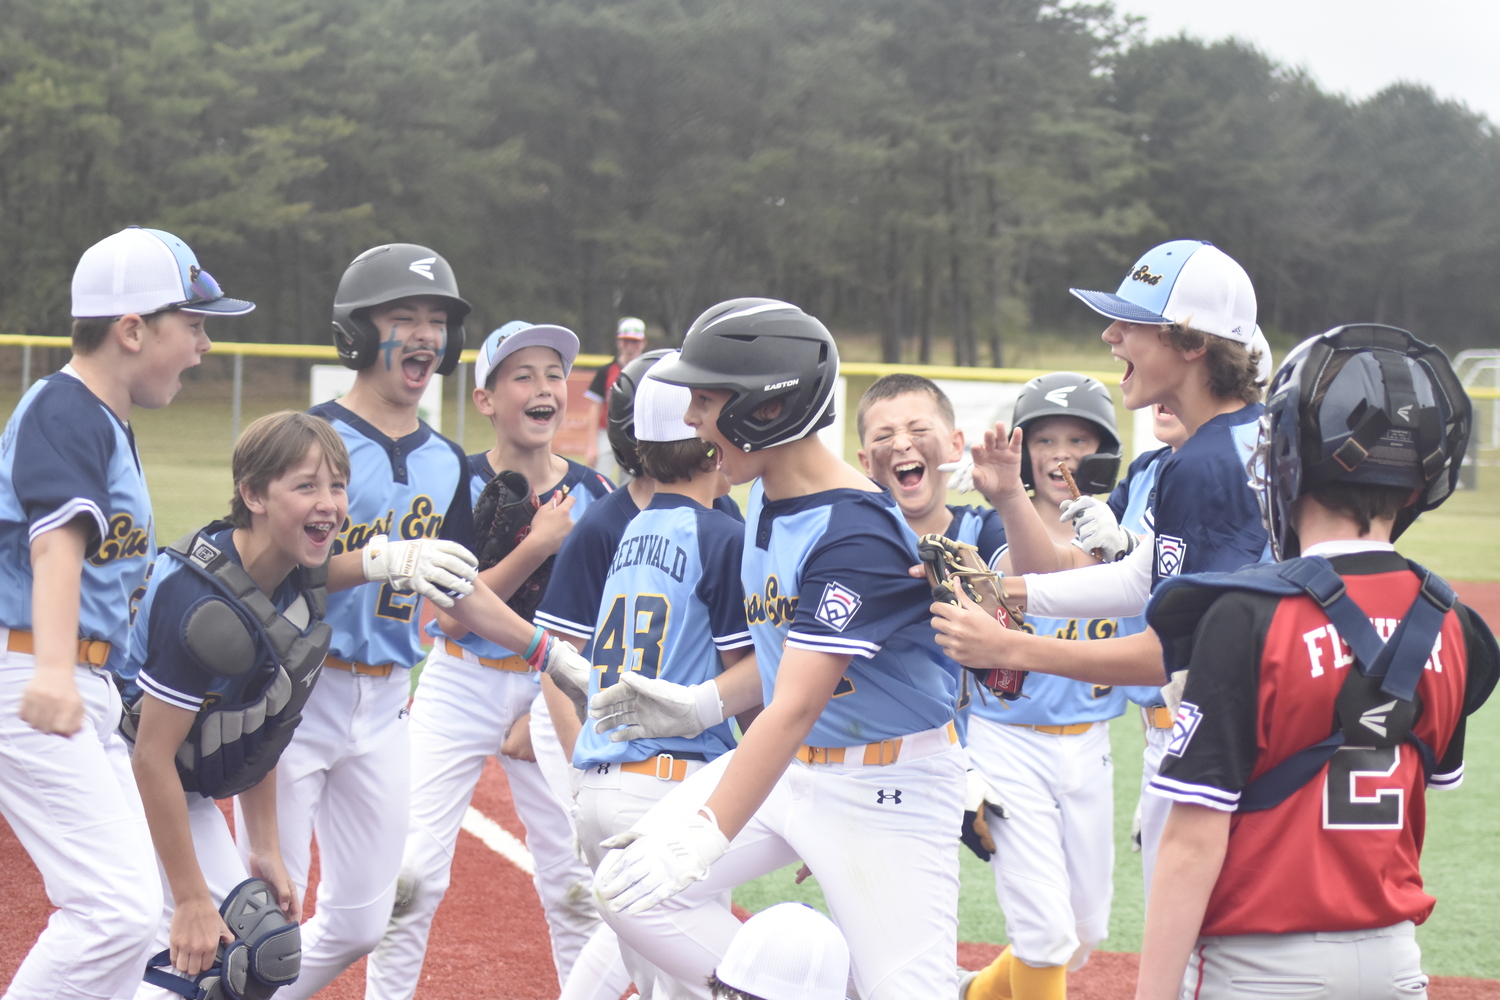 Blake Schaffer is mobbed at home plate by his teammates after his game-tying home run against Sag Harbor last week.   DREW BUDD